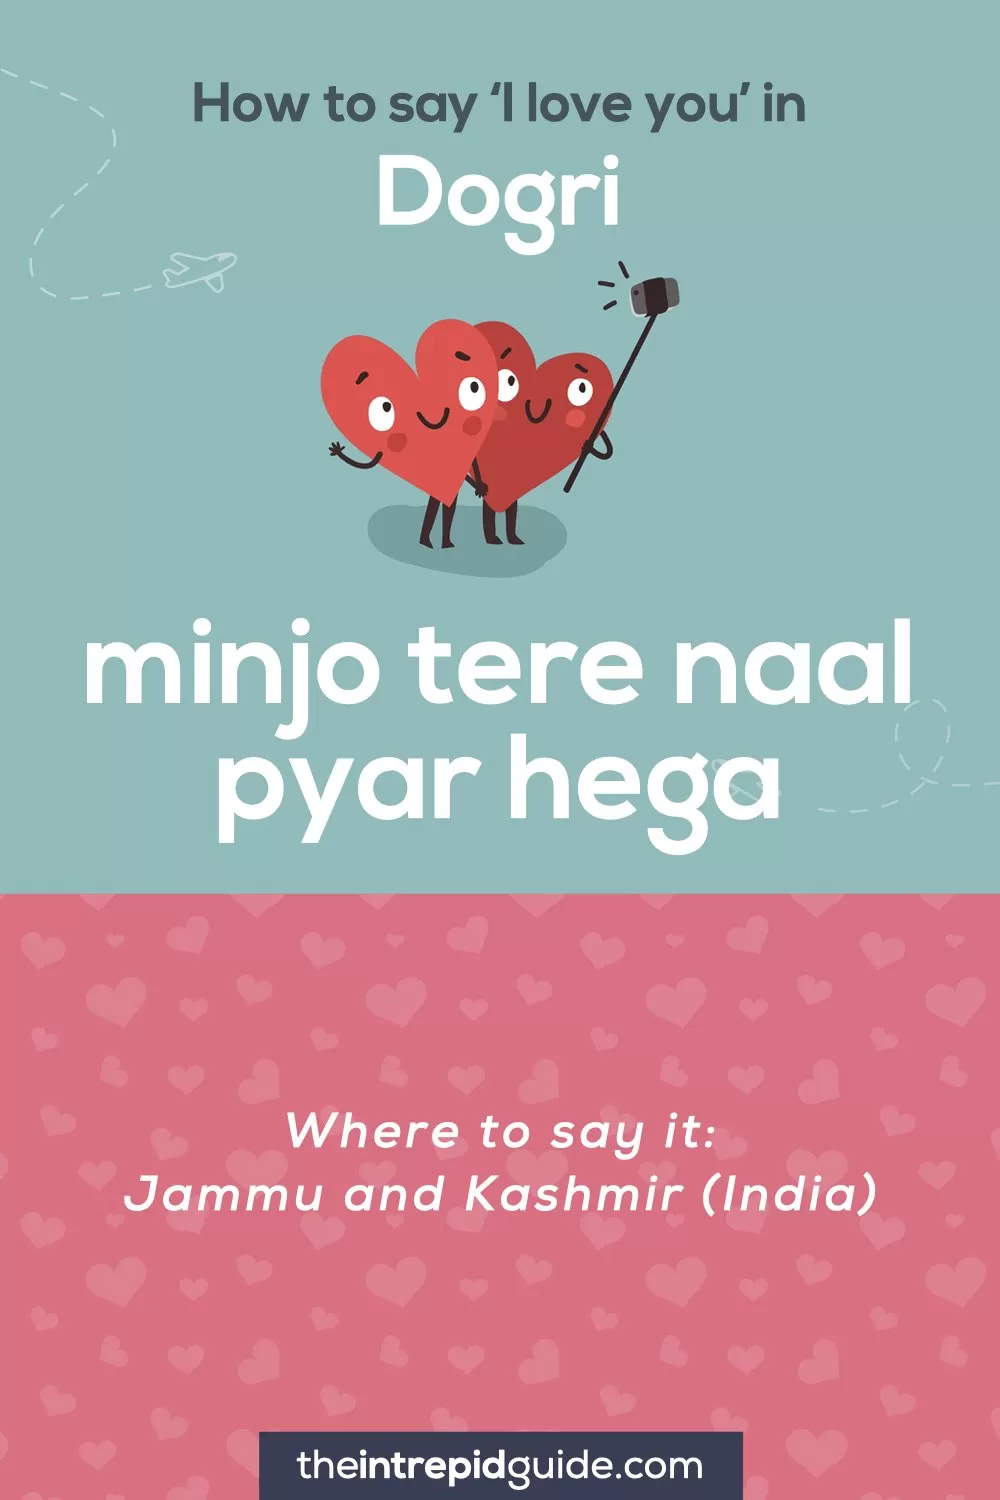 How to say I love you in different languages - Dogri - minjo tere naal pyar hega